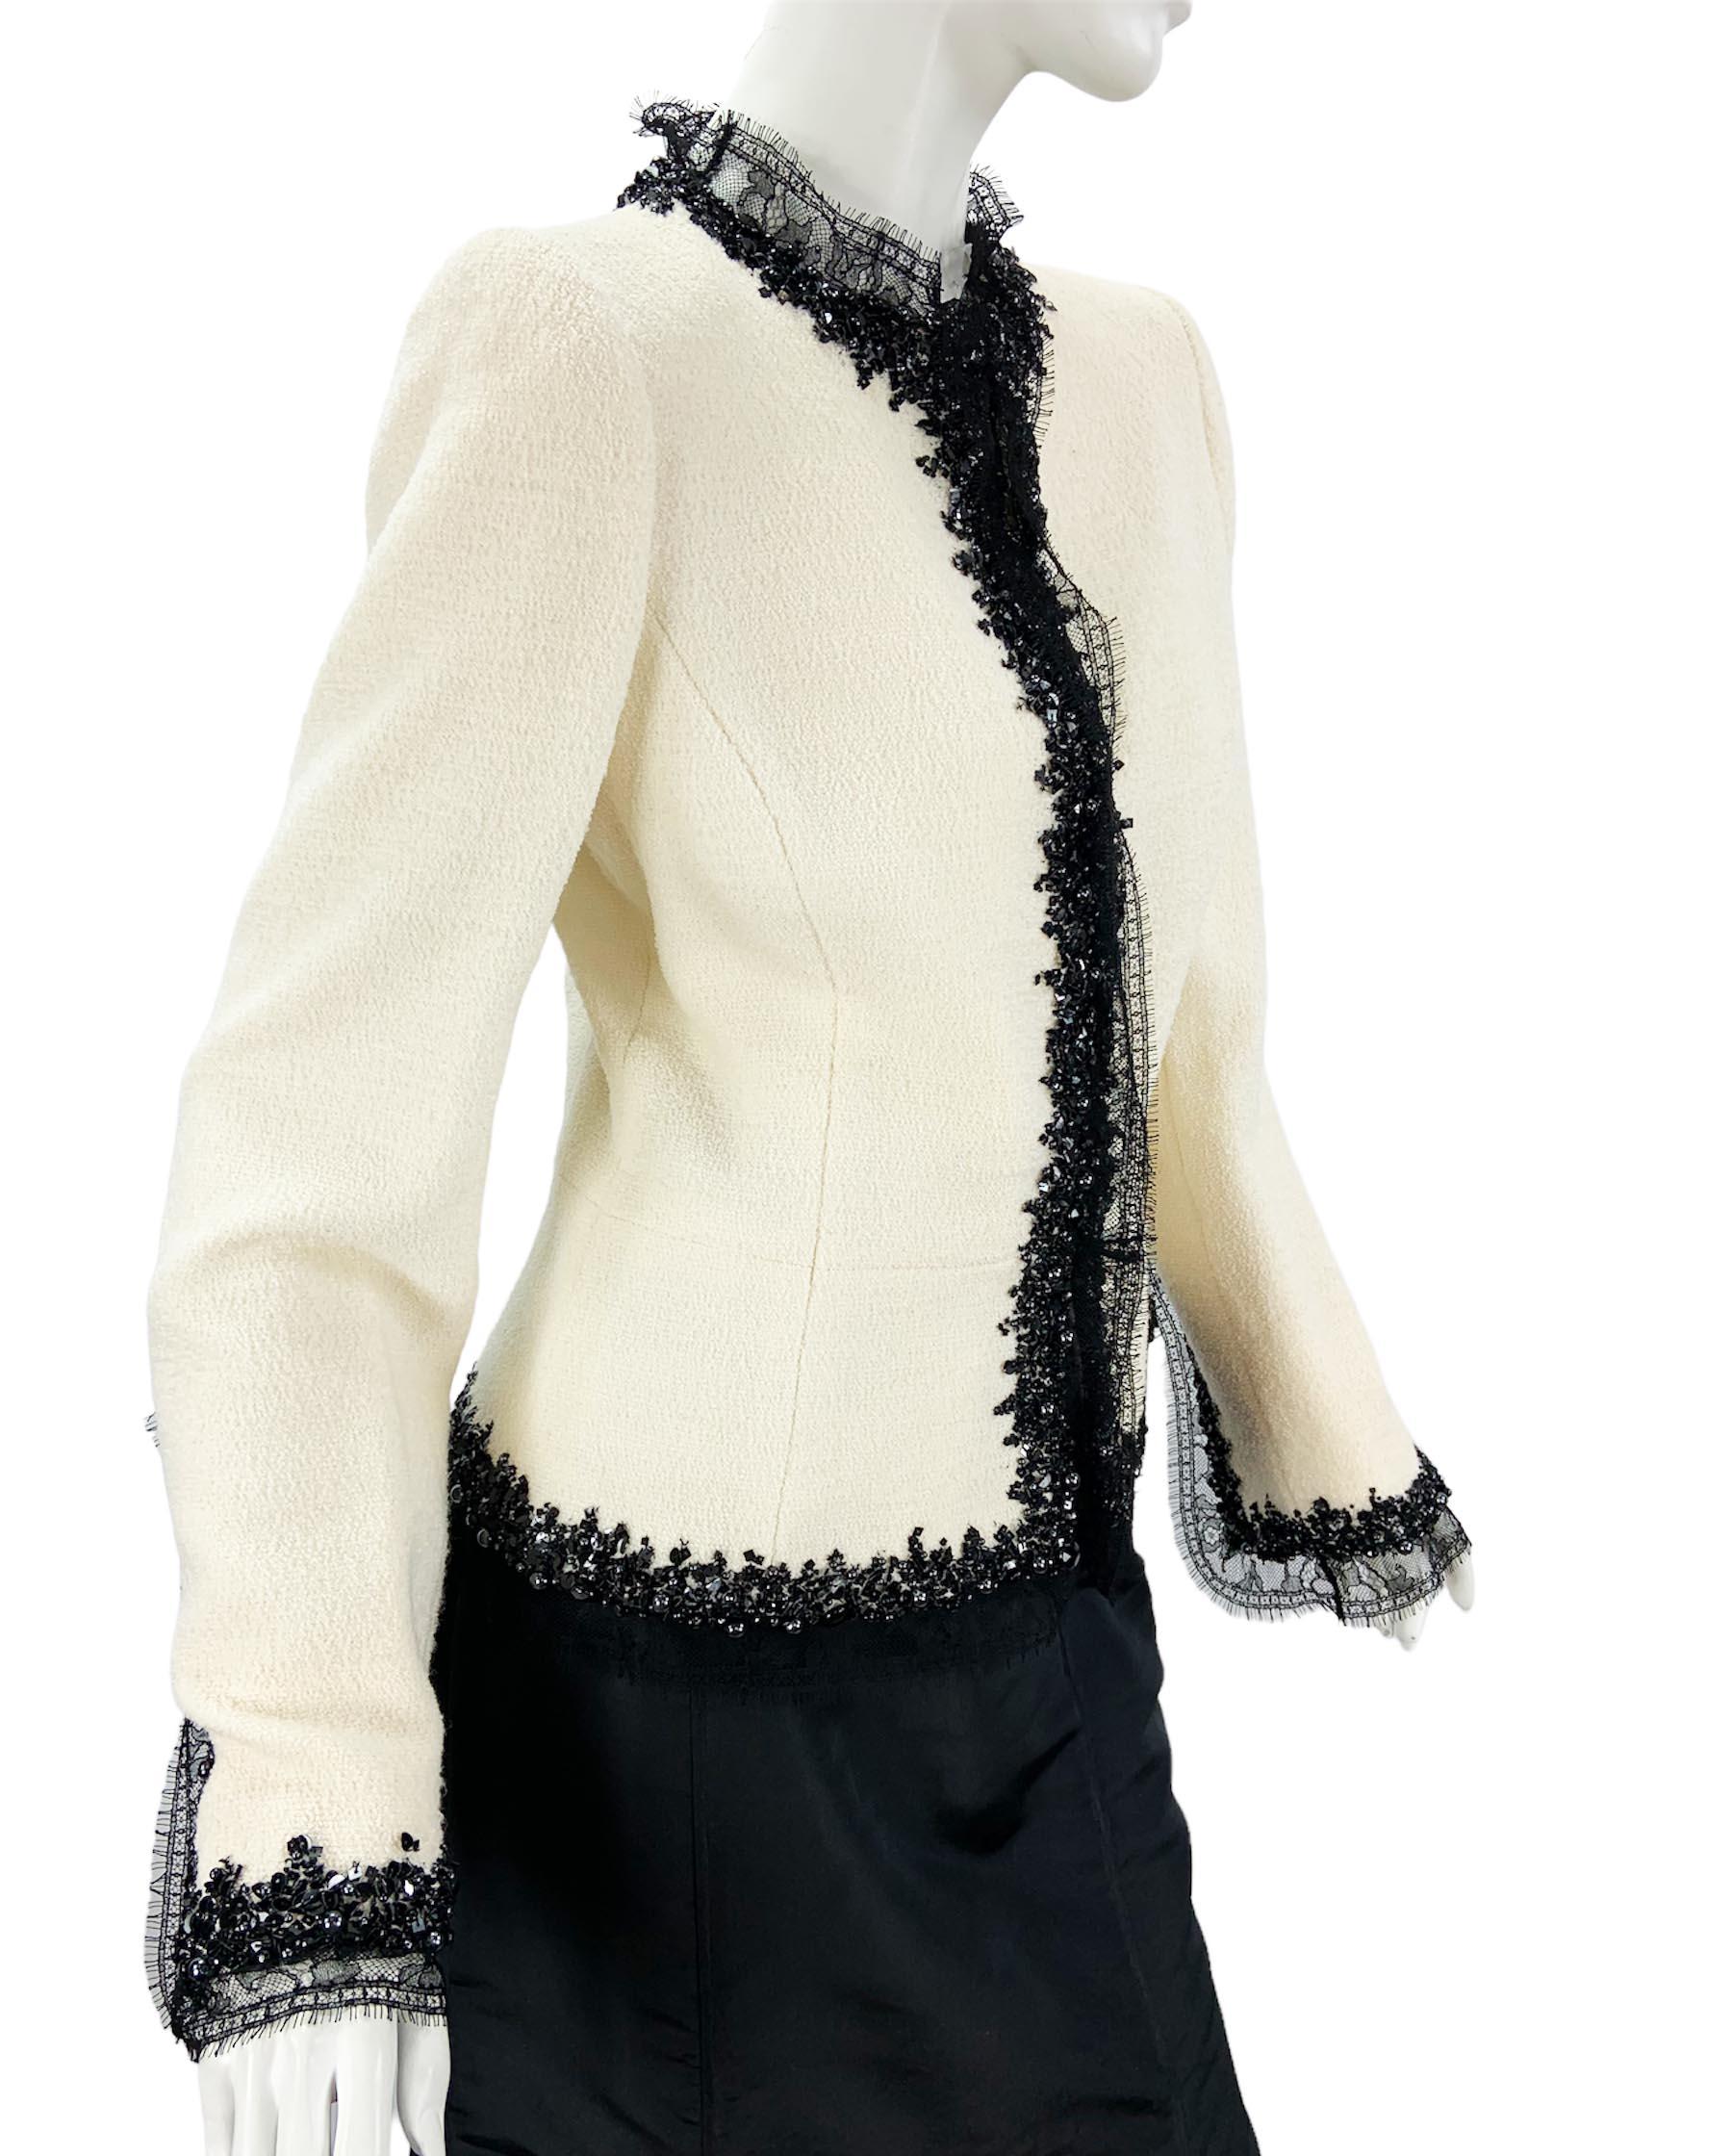 Vintage Oscar de la Renta Boucle Embellished Fitted Jacket
US size 8 
Fitted White Boucle Jacket Finished with Black Lace, Beads and Sequins. Fully Lined, Peplum Style, Hook and Eye Closure, Padded Shoulders.
Measurements: Length - 21